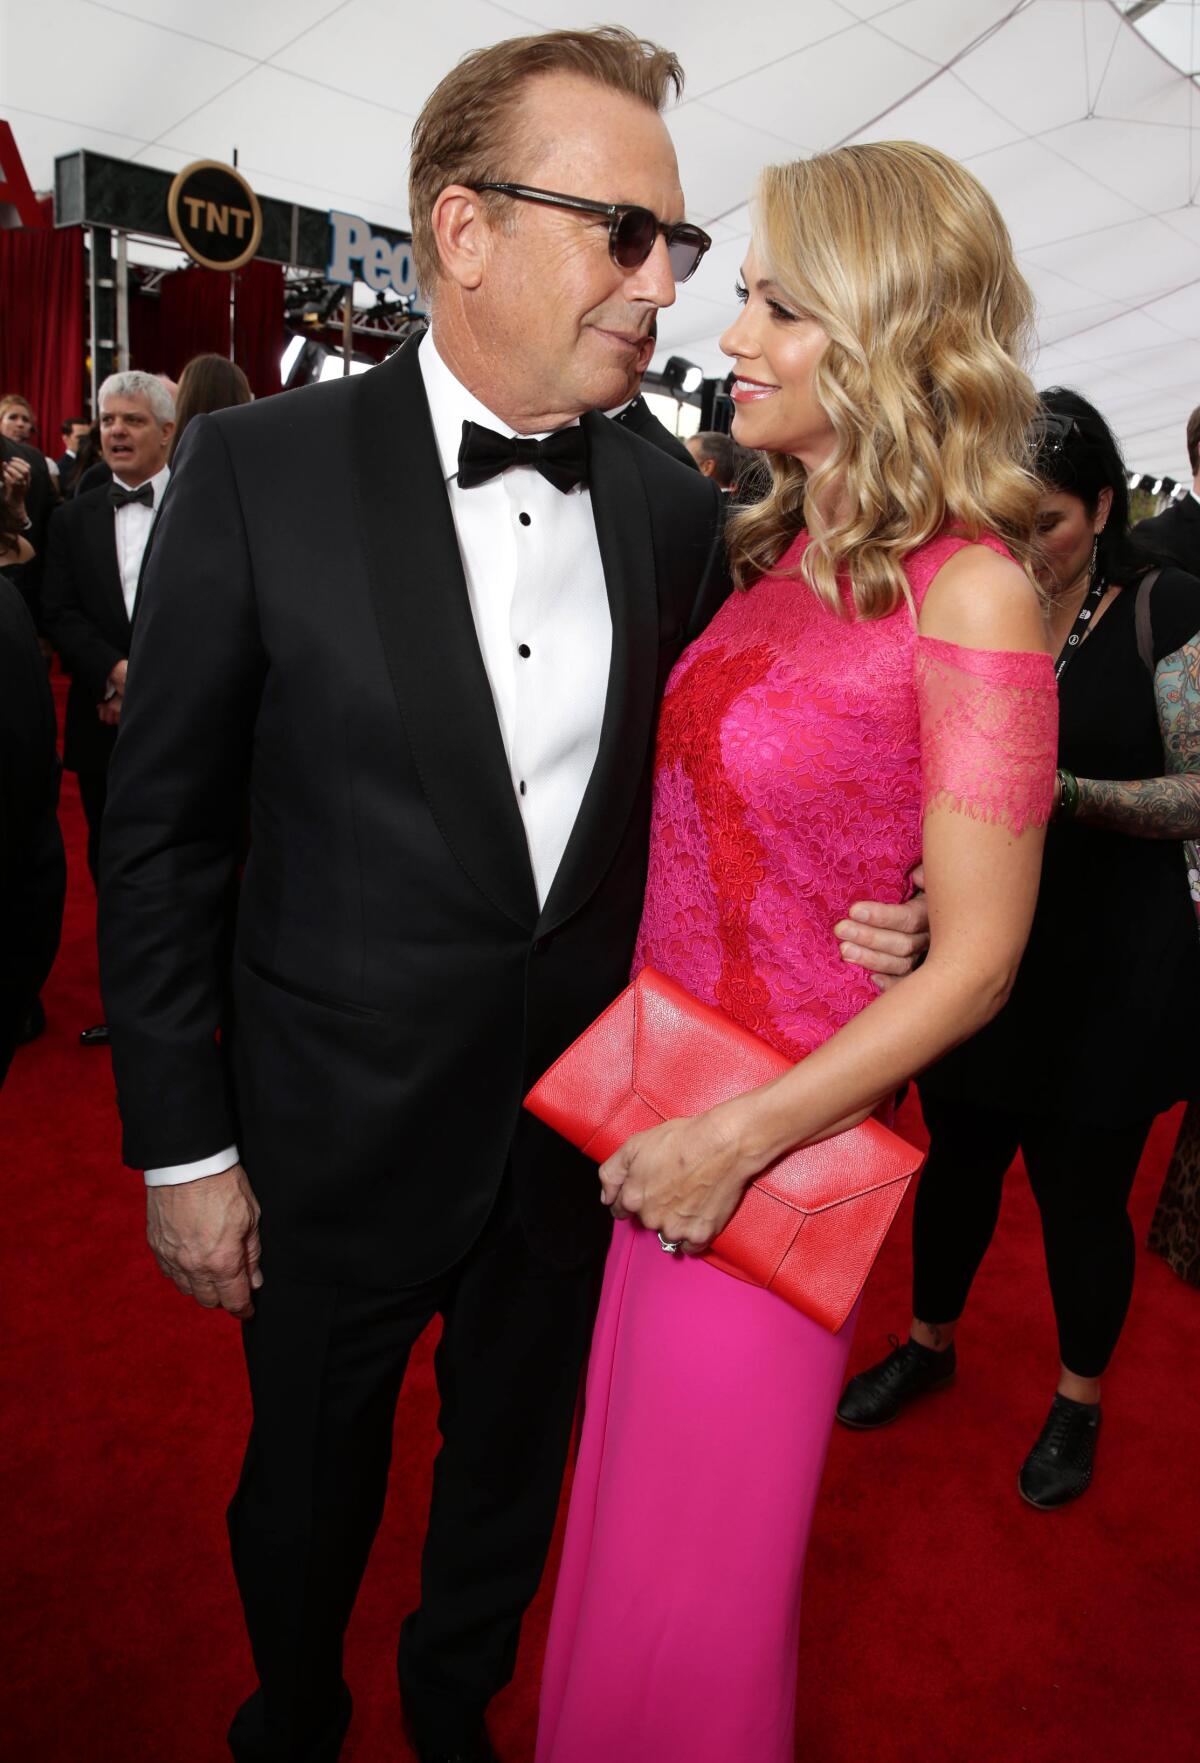 Kevin Costner wears a tuxedo and shades and smiles at Christine Baumgartner, who's wearing a pink lace gown. 